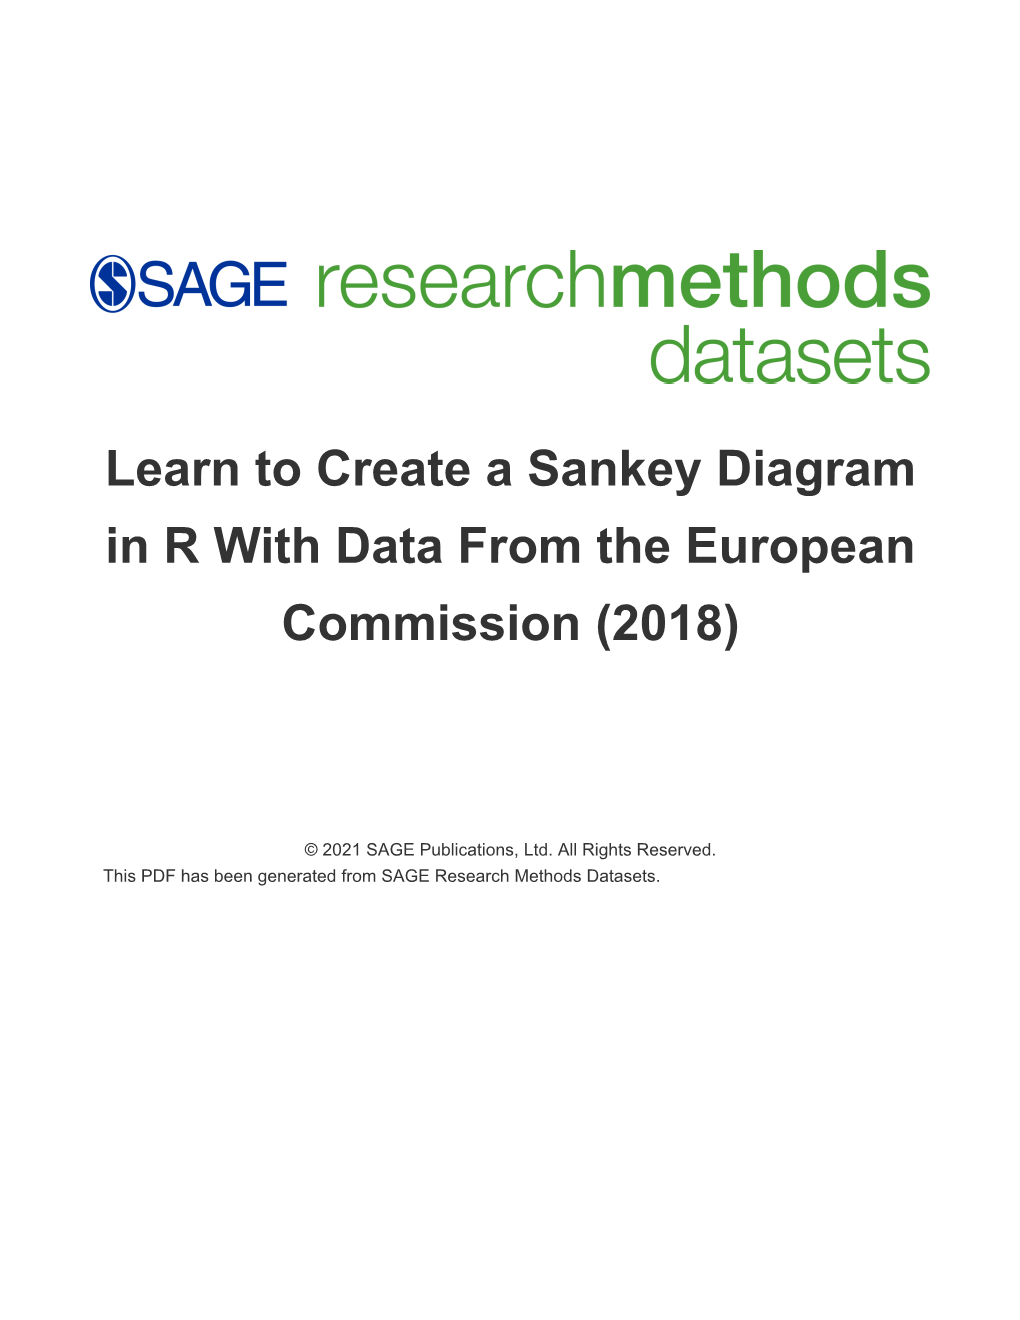 Learn to Create a Sankey Diagram in R with Data from the European Commission (2018)